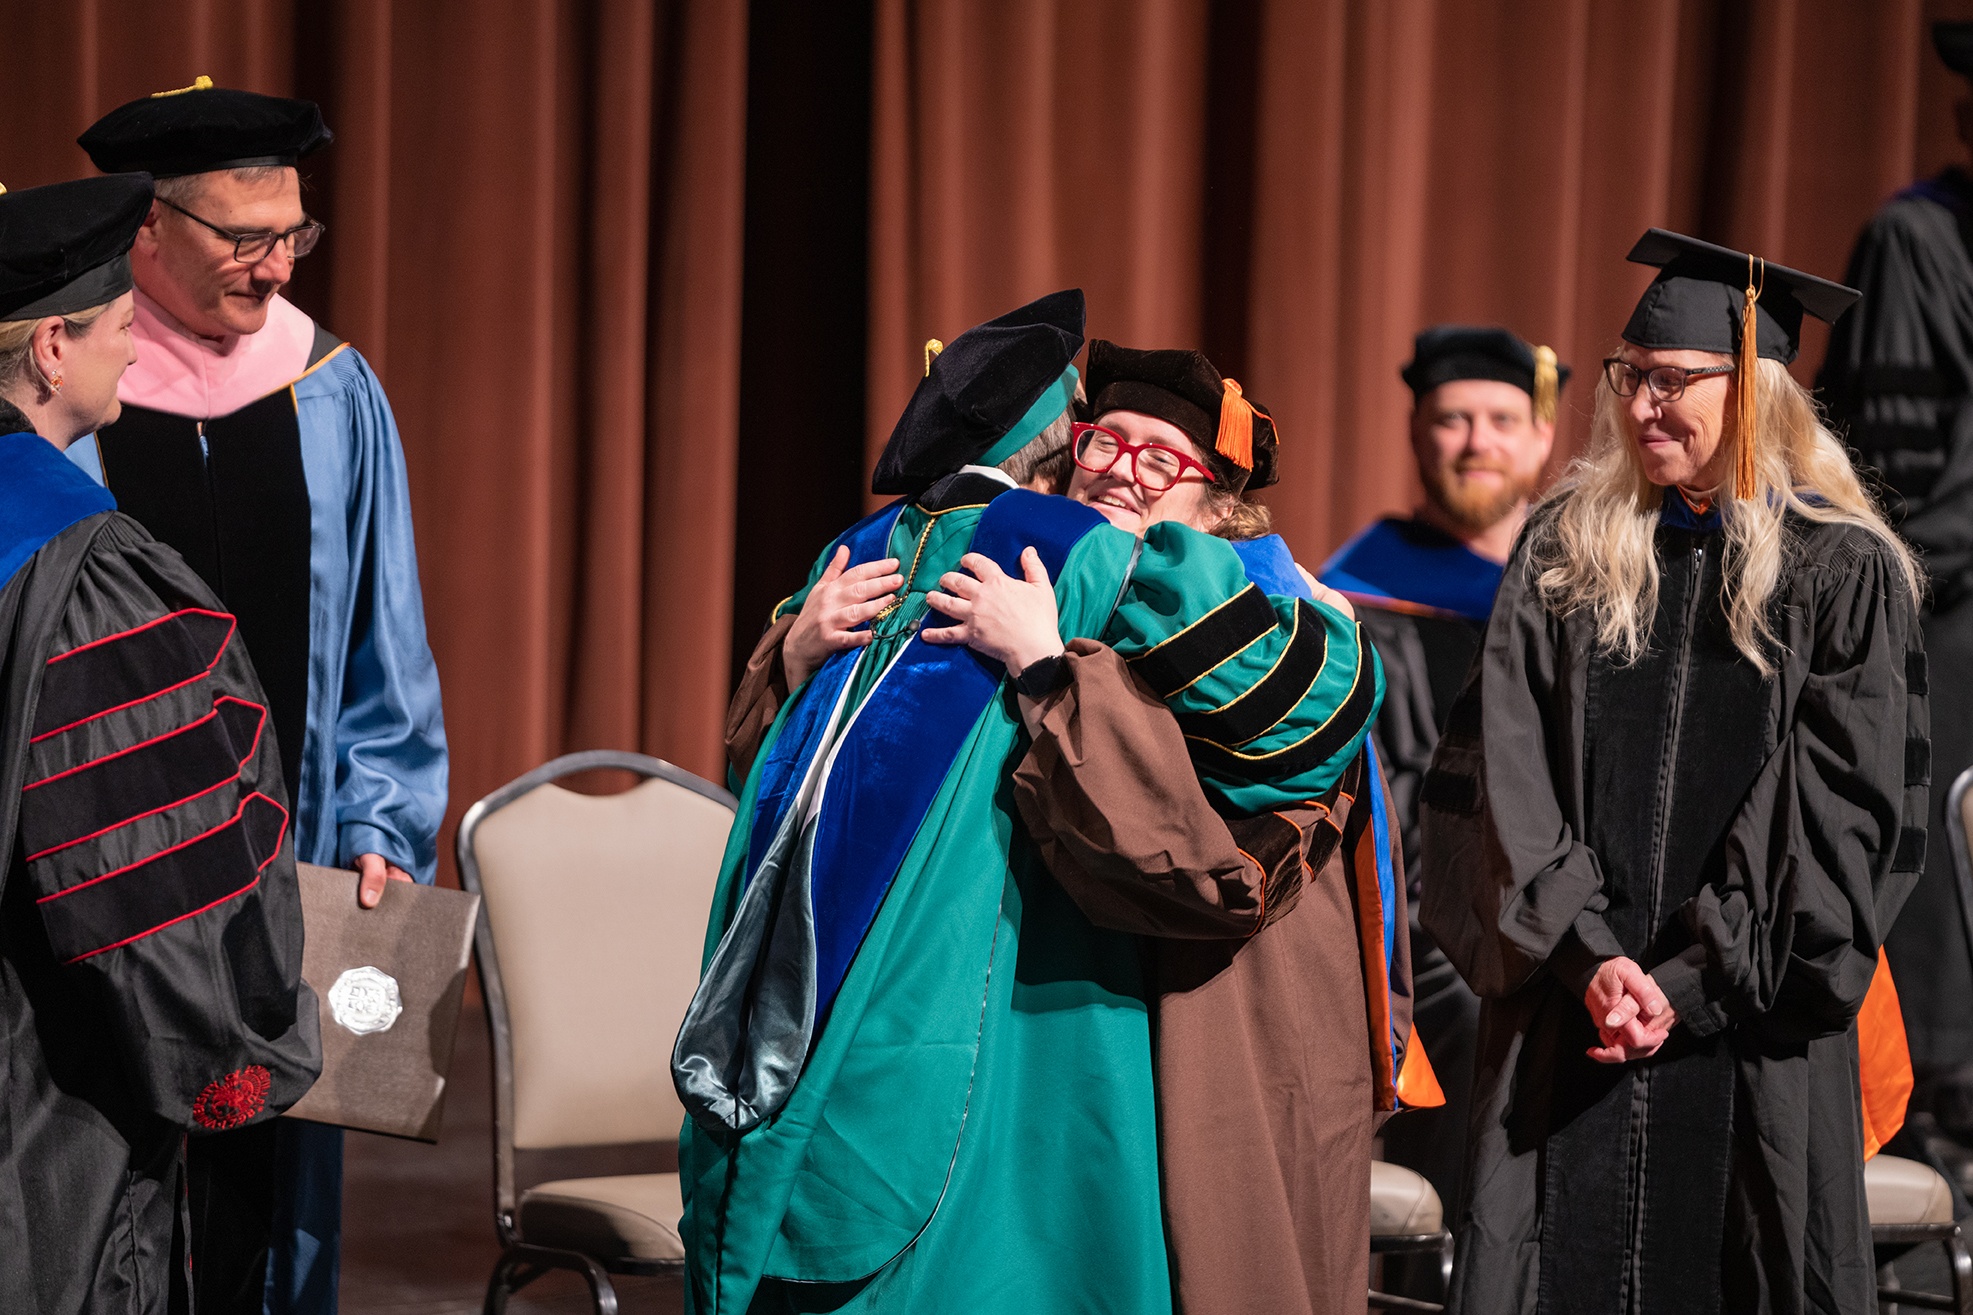 Doctoral candidate is hugged by dean at hooding ceremony